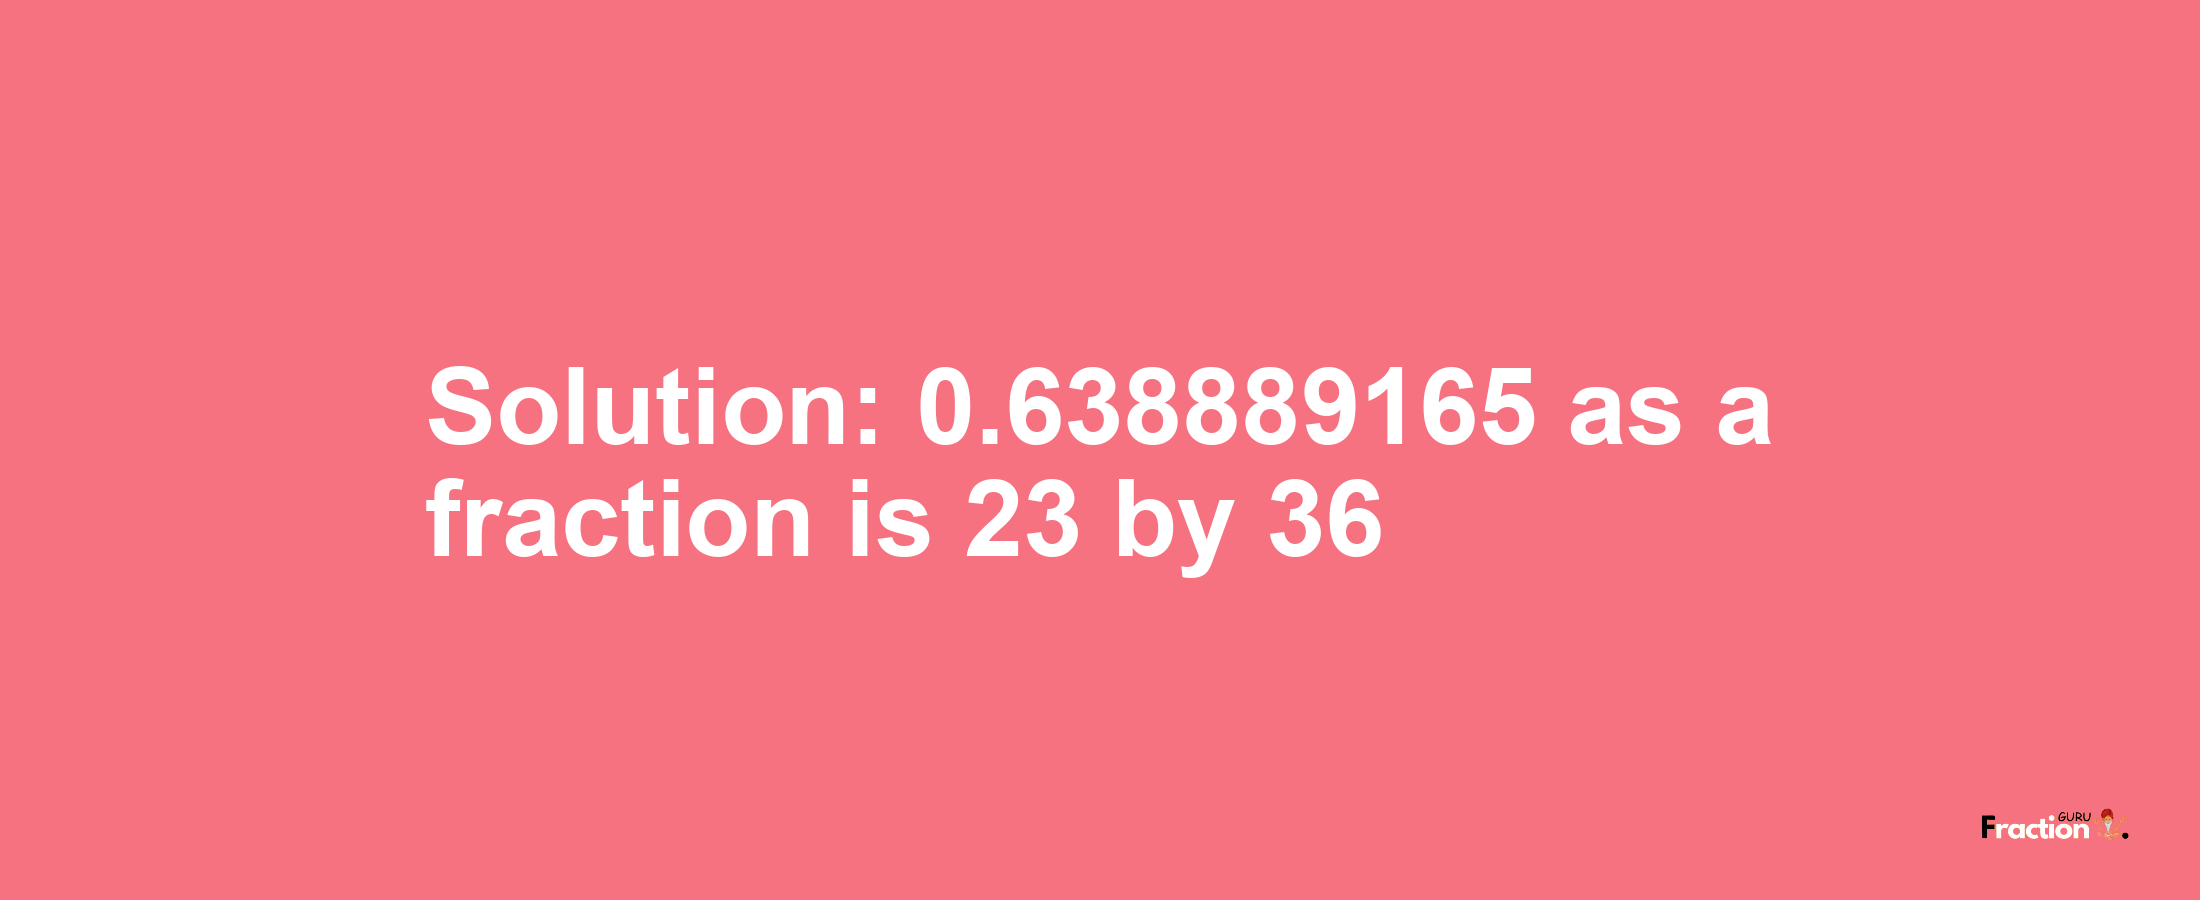 Solution:0.638889165 as a fraction is 23/36